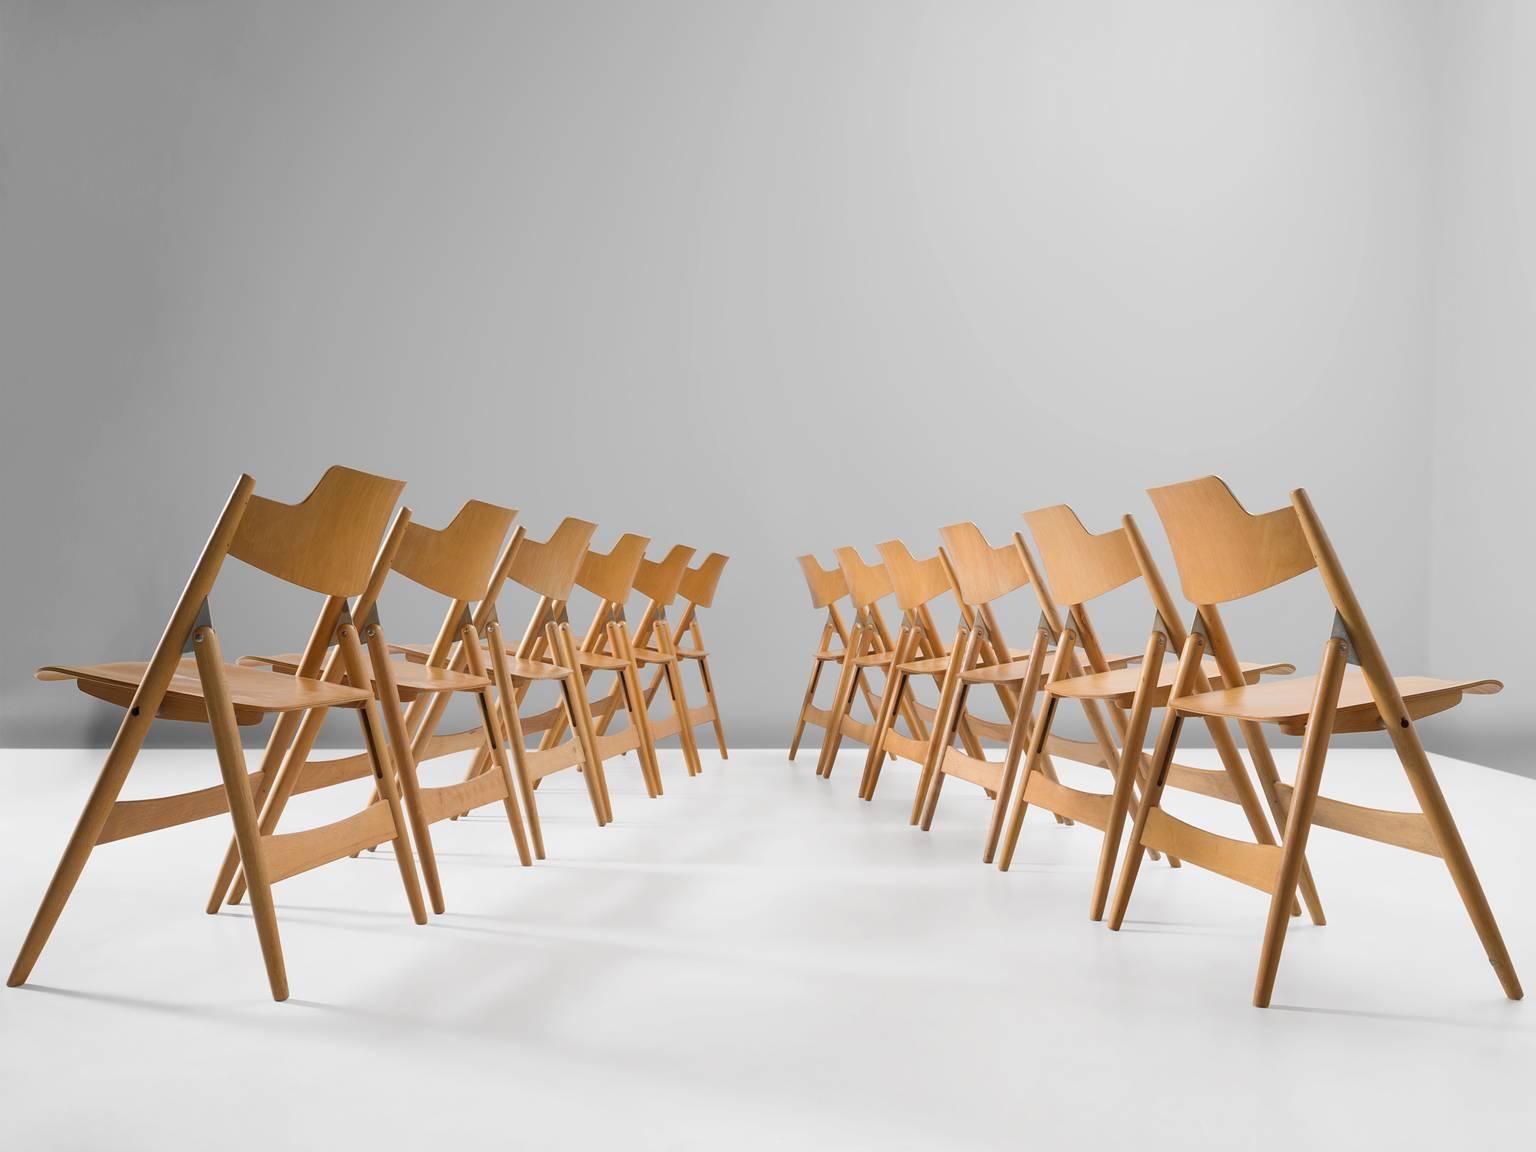 Set of twelve foldable chairs in beech by Egon Eiermann, 1960, Germany.

These folding chairs were designed in 1952 by Egon Eiermann (1904-1970) for Wilde & Spieth. The chairs are extremely functional and simple in their design, they can be